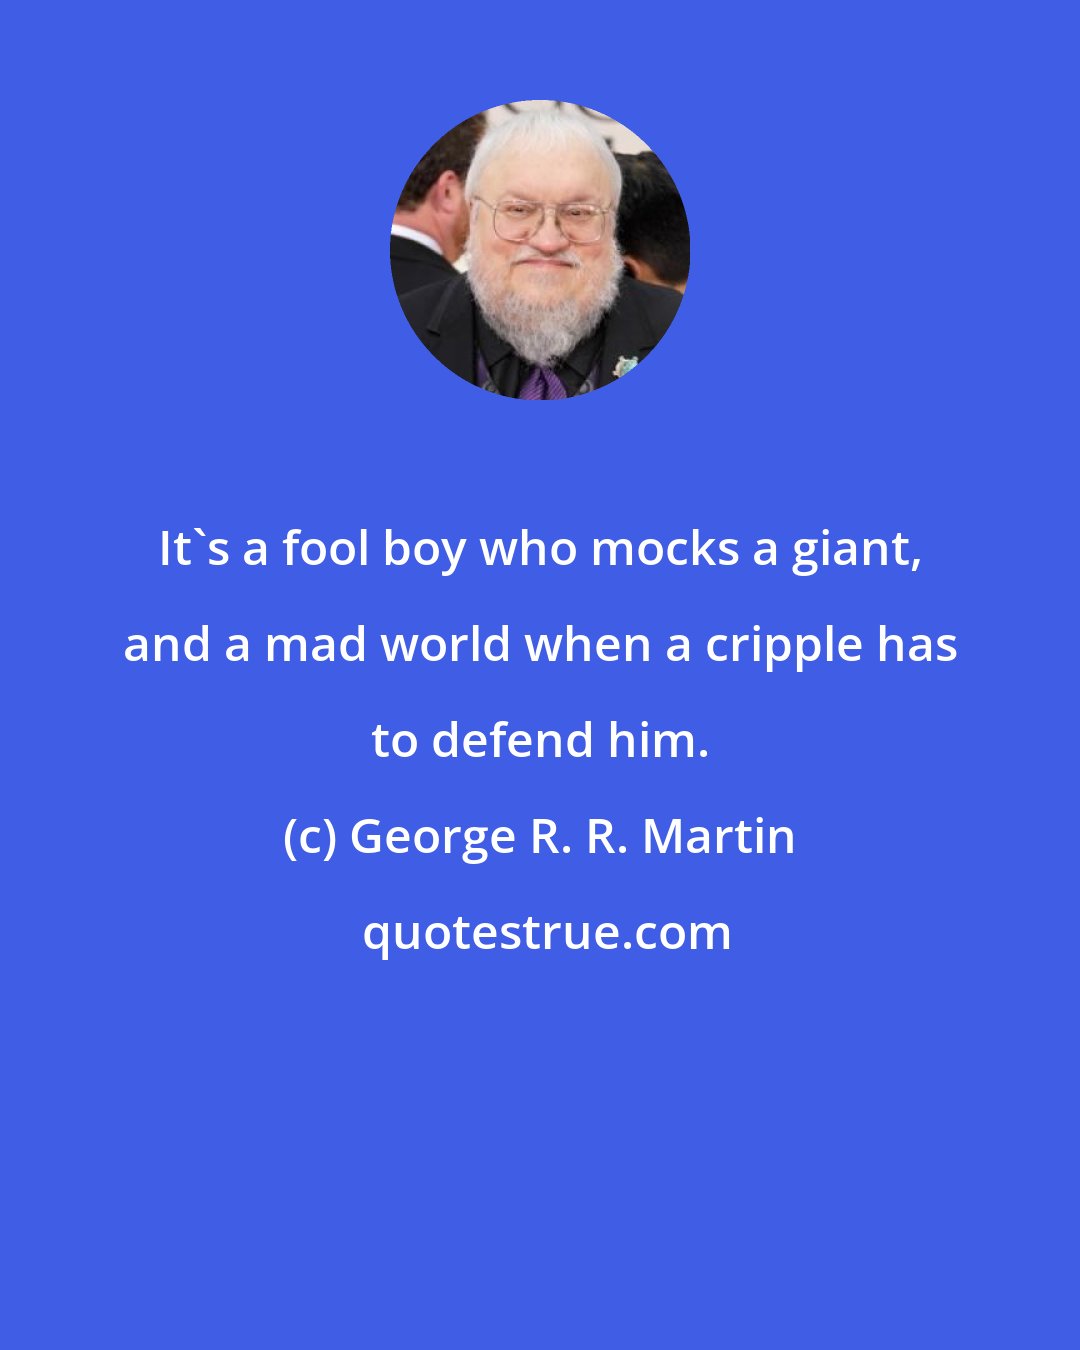 George R. R. Martin: It's a fool boy who mocks a giant, and a mad world when a cripple has to defend him.